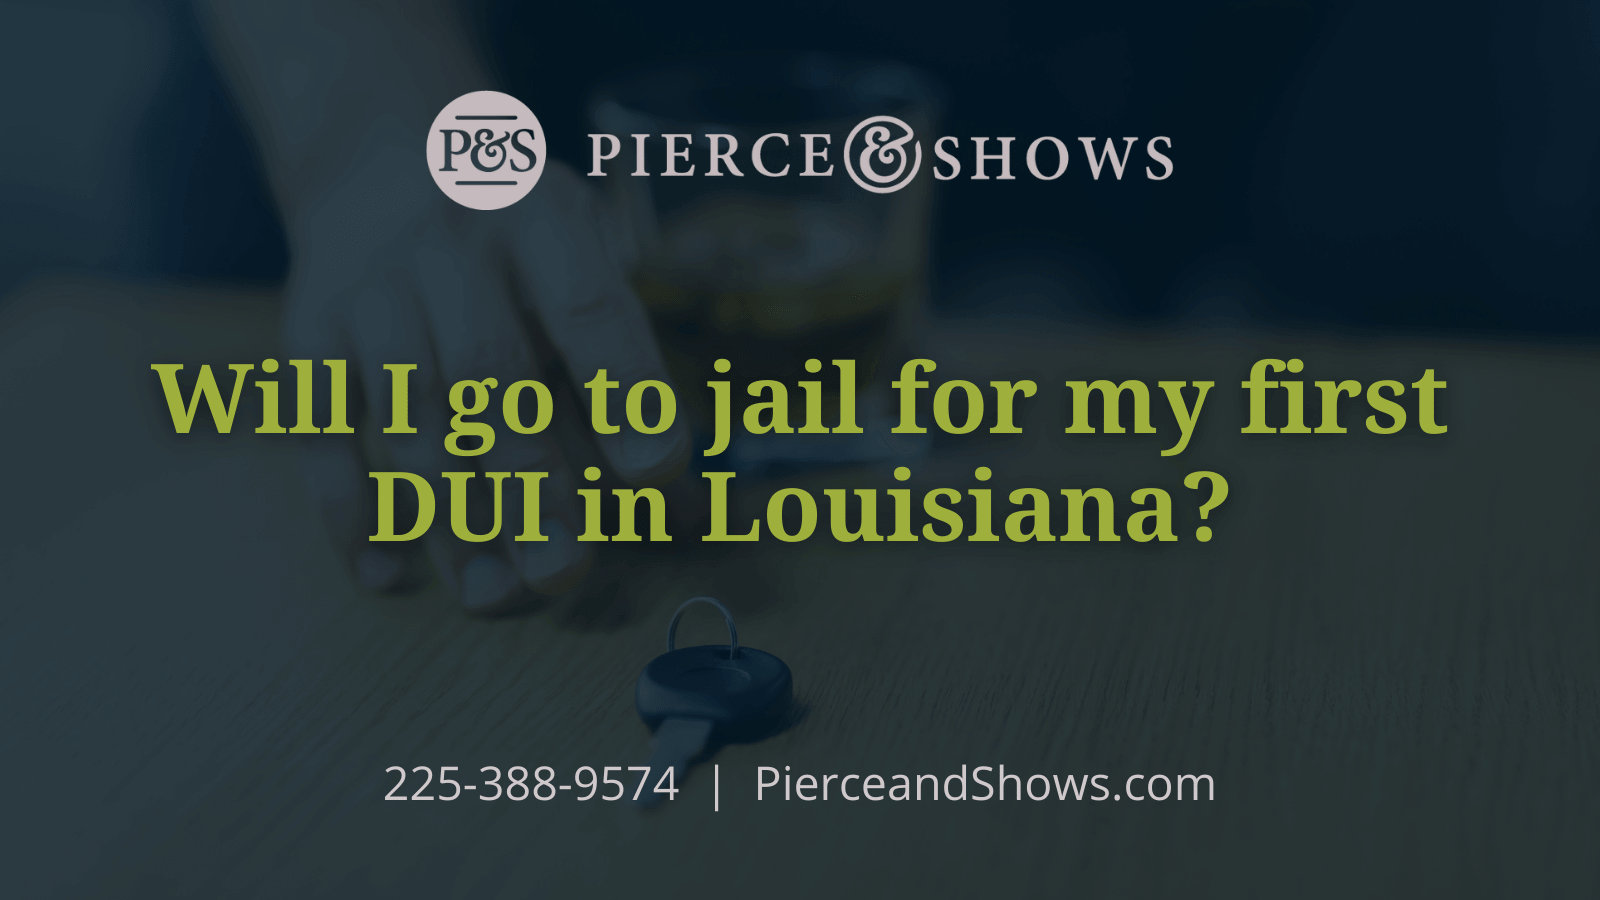 Will I go to jail for my first DUI in Louisiana - Baton Rouge Louisiana injury attorney Pierce & Shows